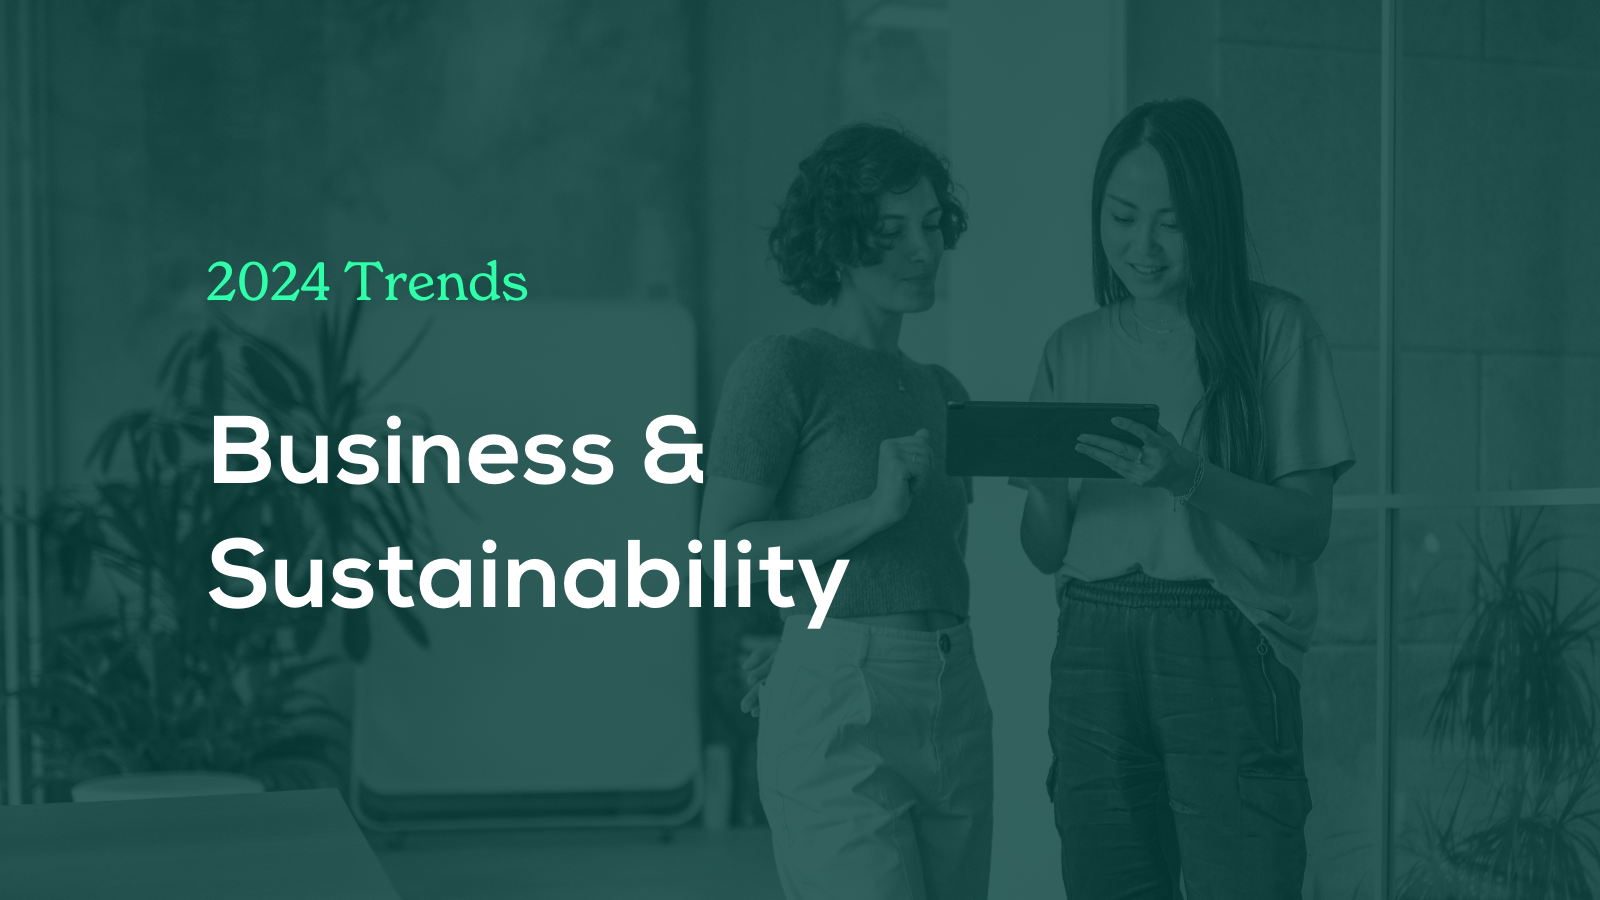 2024 Business & Sustainability Trends